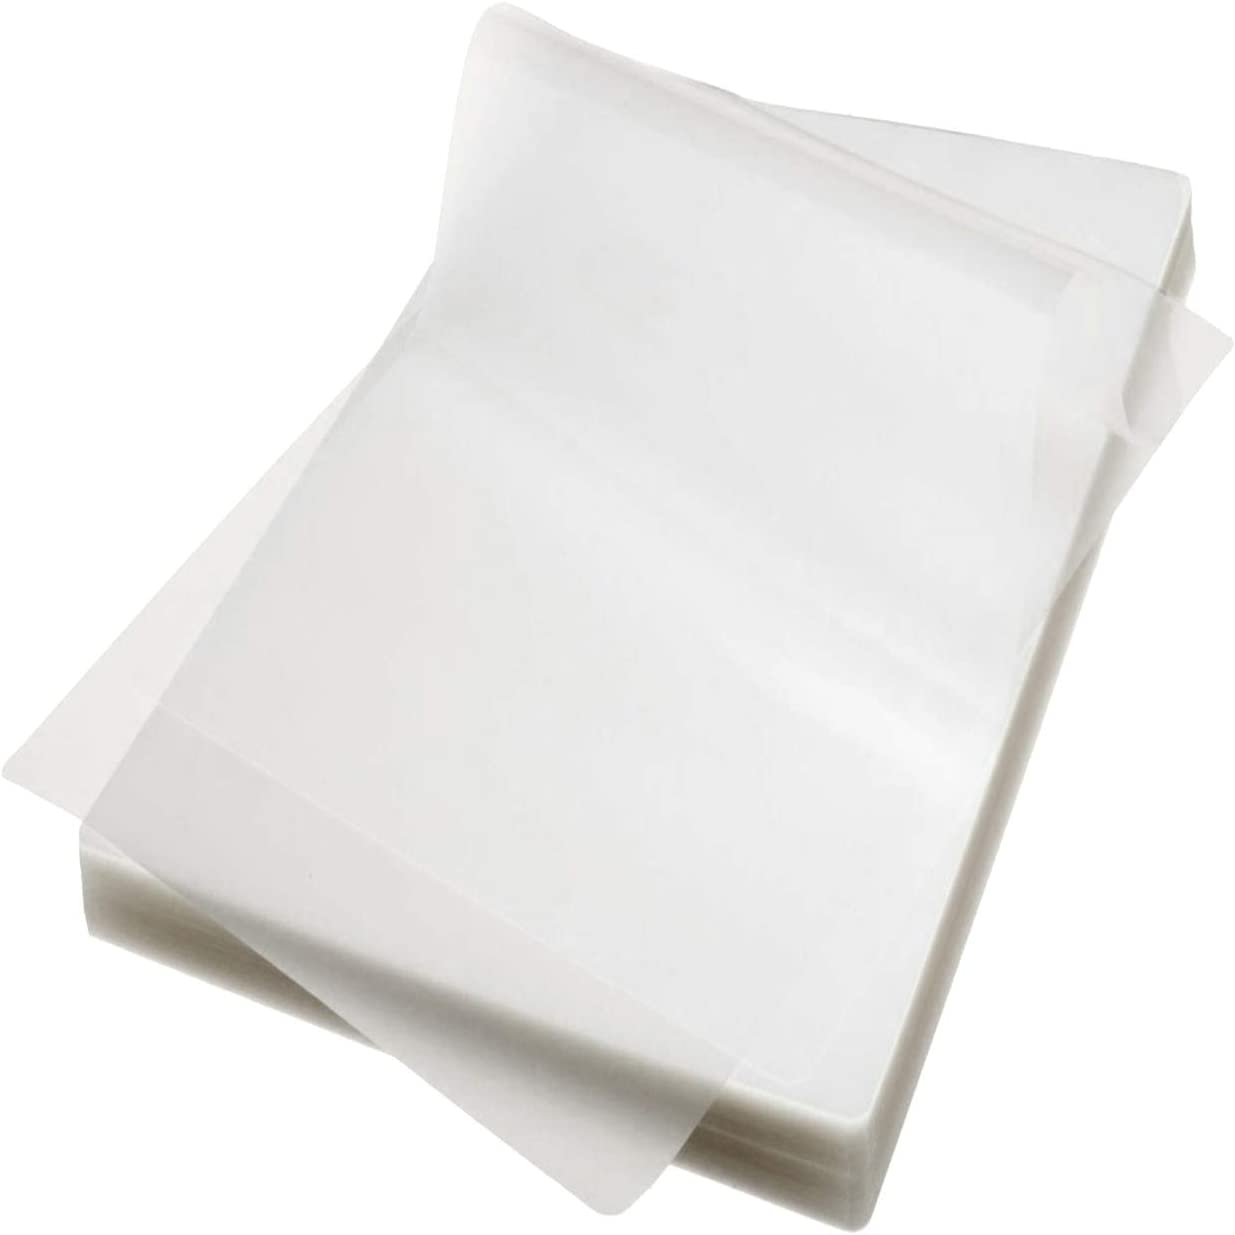 Oregon Lamination Hot Laminating Pouches Small Menu (Pack of 100) 5 Mil 11-1/2 x 17-1/2 Matte/Matte Import To Shop ×Product